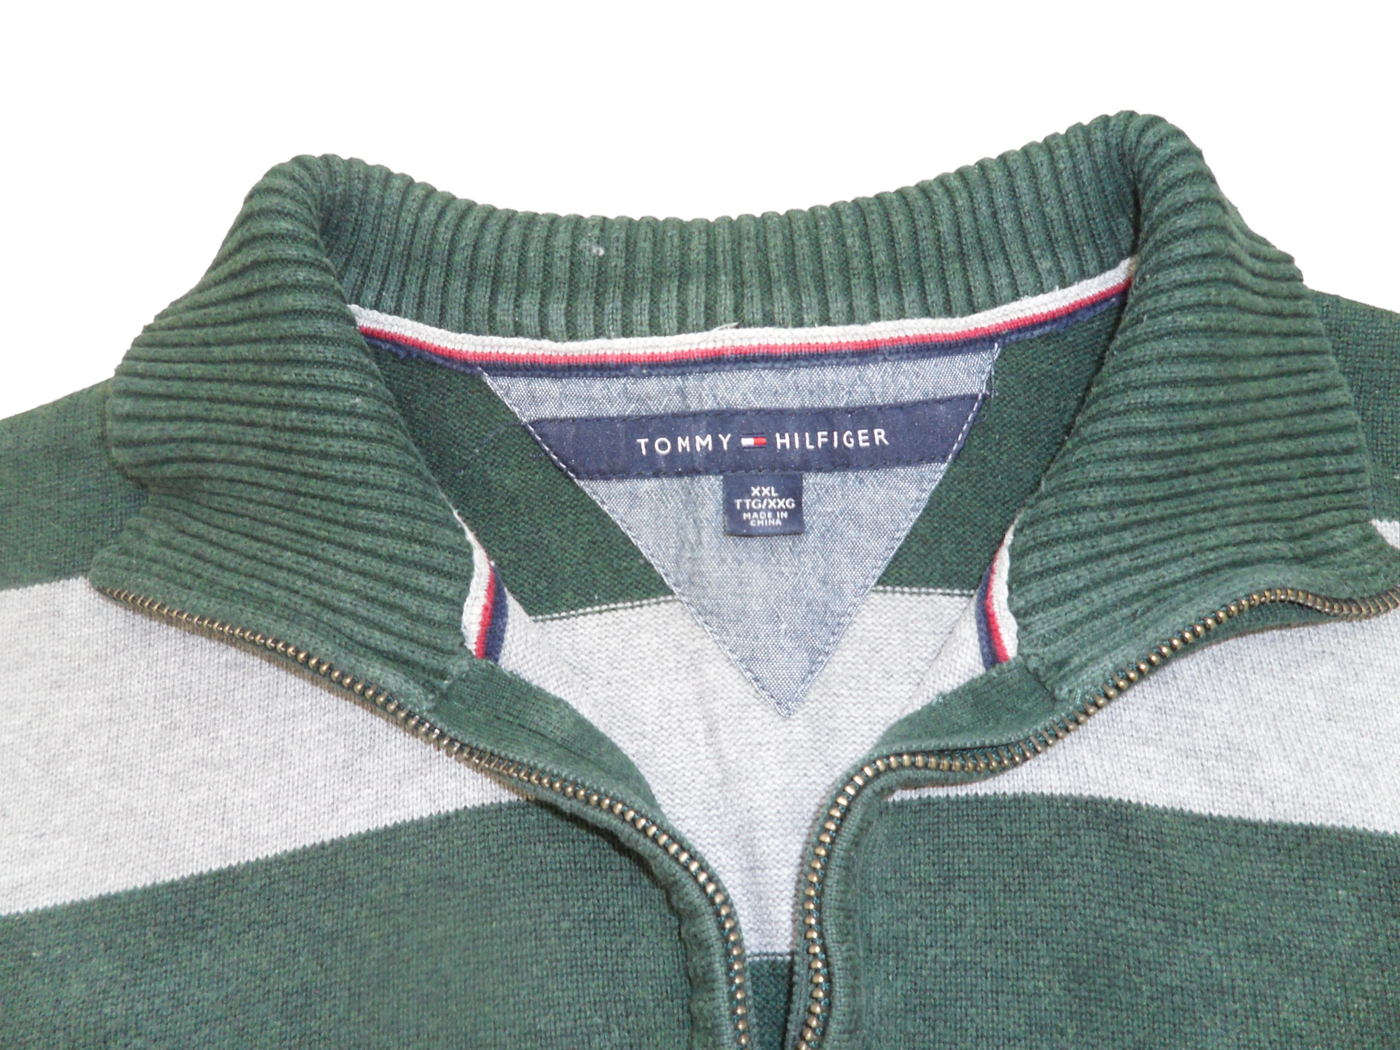 Vintage Tommy Hilfiger Green and Grey Broad Stripes Cotton Quarter Zip Pullover Size-XXL